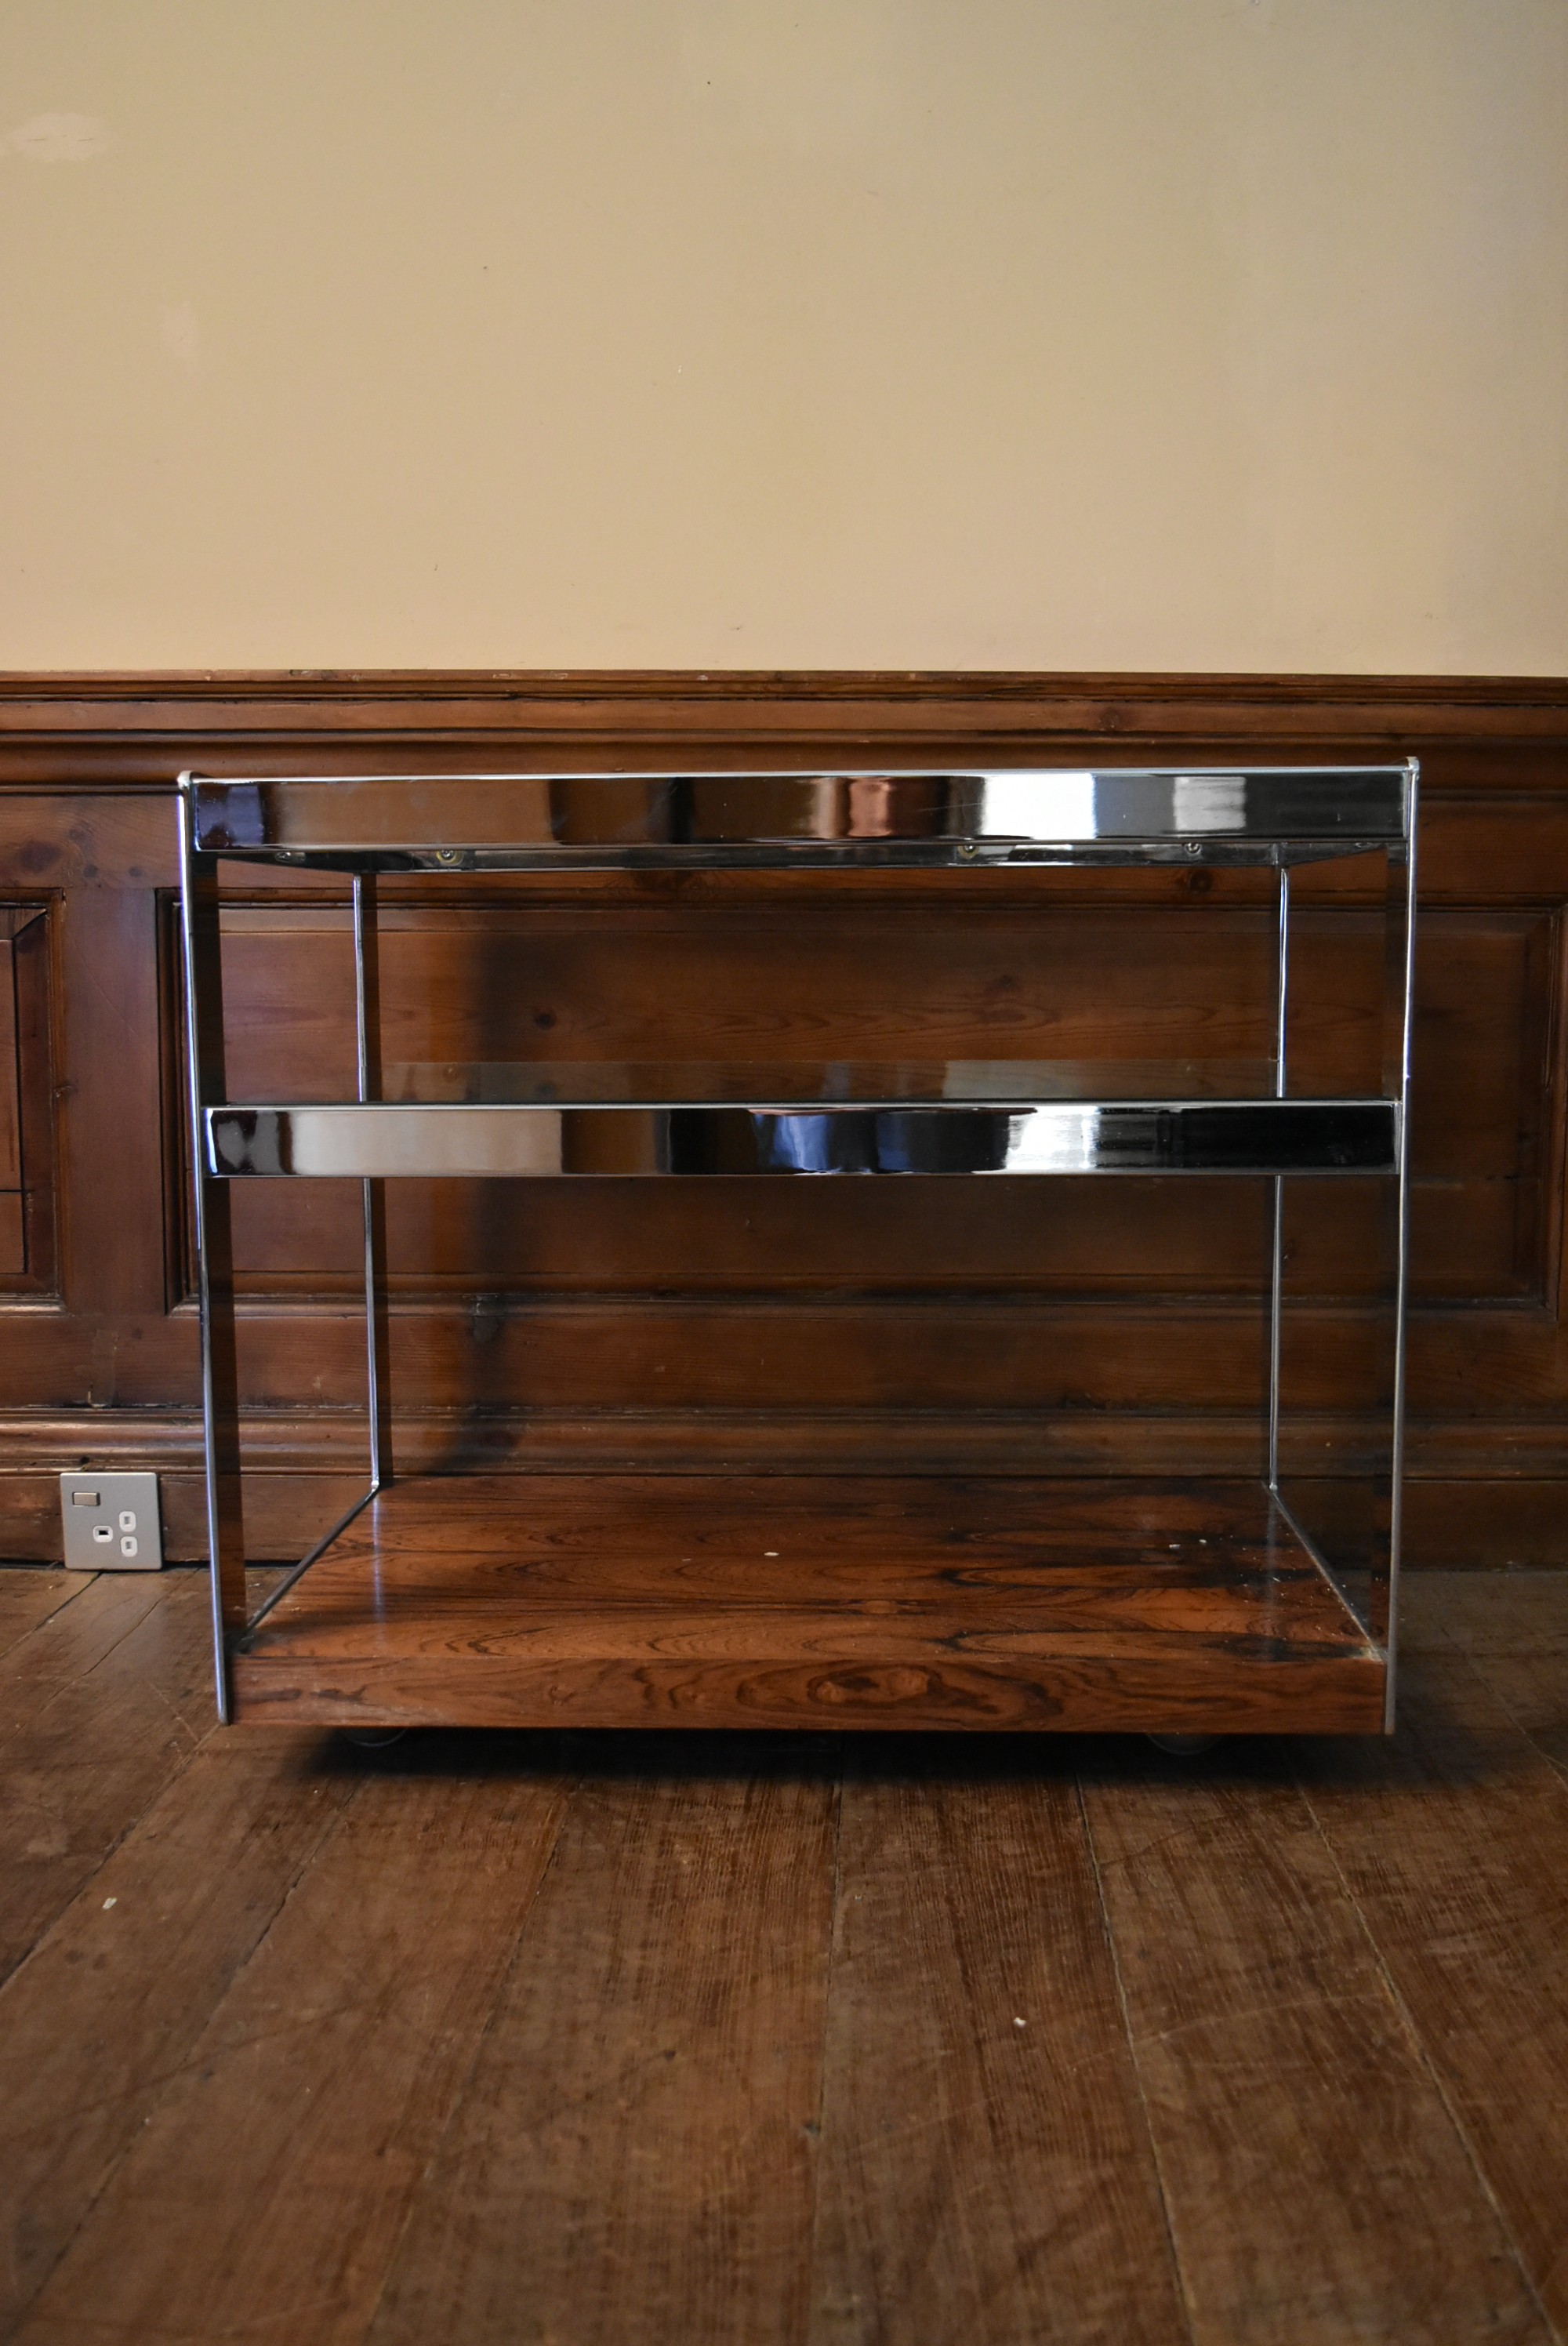 A Merrow Associates chrome framed drinks trolley with plate glass tiers on casters. H.64 W.73 D.46cm